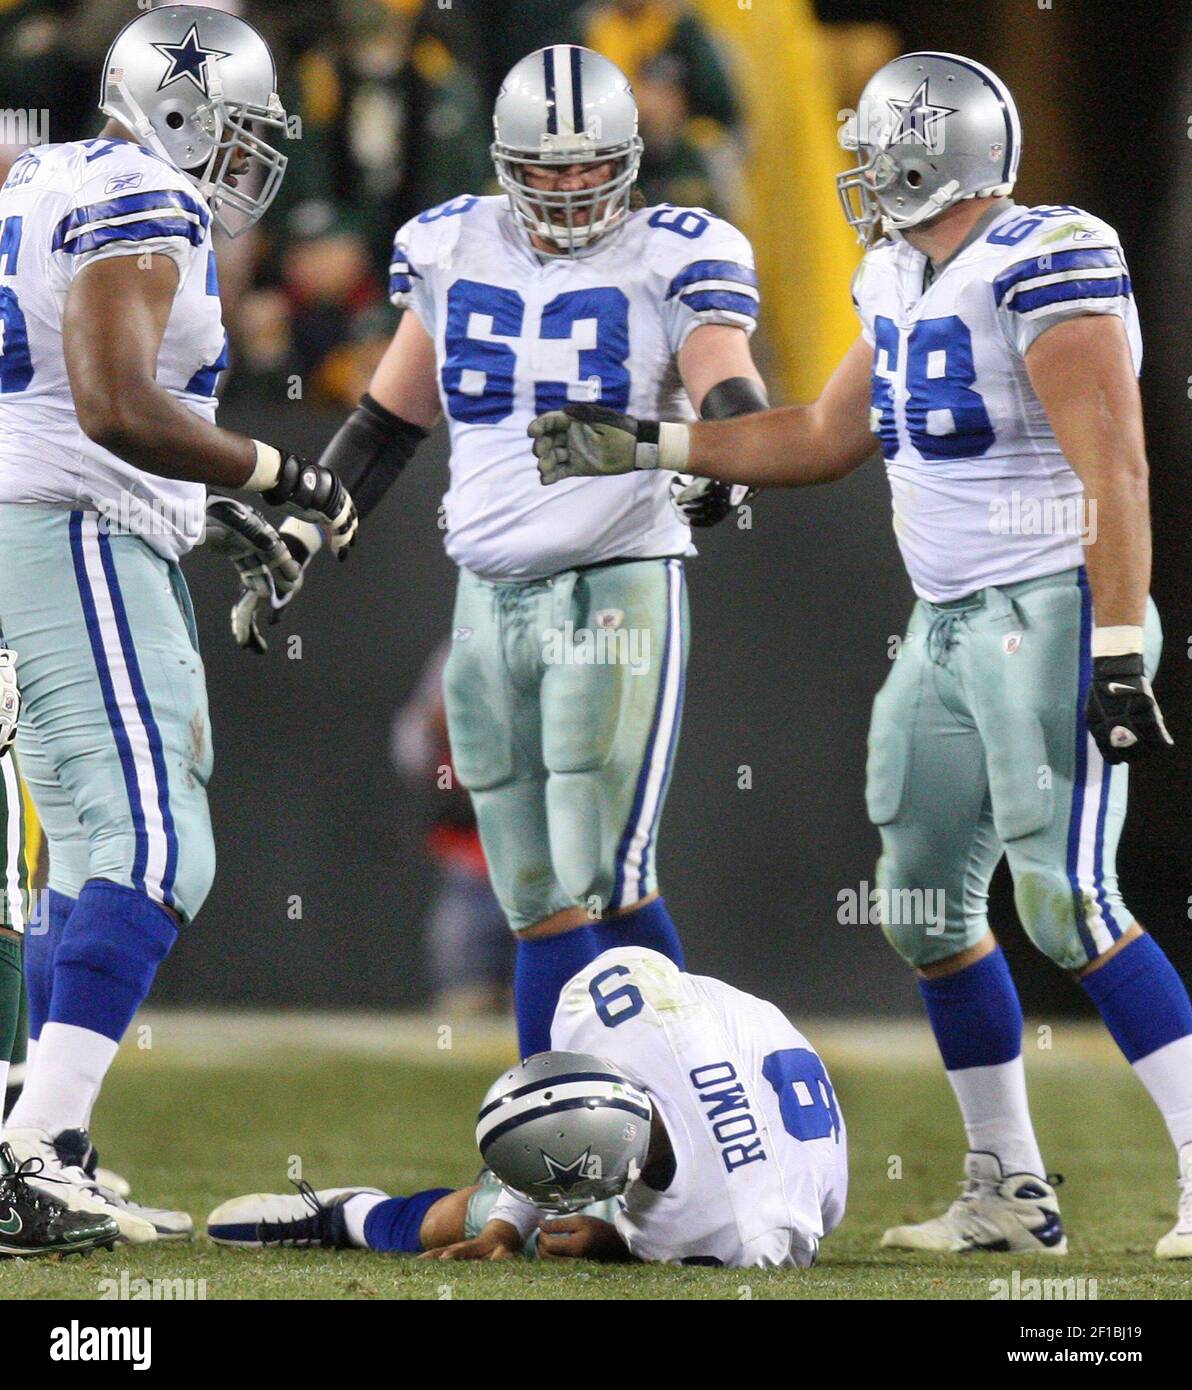 From left, Dallas Cowboys Flozell Adams, Doug Free (68) and Kyle Kosier (63) stand over their quarterback Tony Romo after a pass play in the fourth quarter against the Green Bay Packers on Sunday, November 15, 2009, at Lambeau Field in Green Bay, Wisconsin. The Packers defeated the Cowboys, 17-7. (Photo by Louis DeLuca/Dallas Morning News/MCT/Sipa USA) Stock Photo